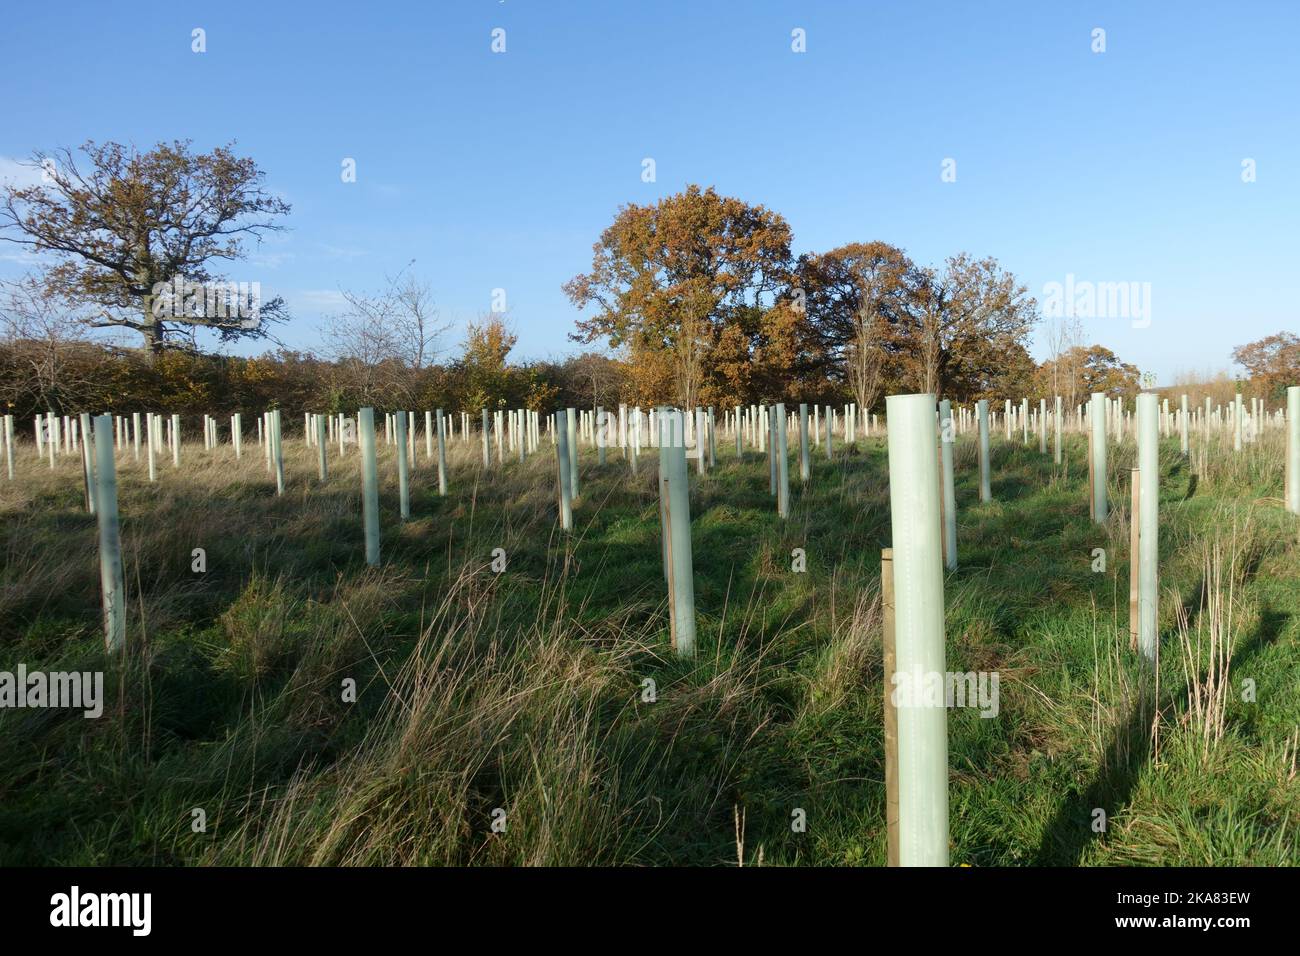 A new plantation of deciduous trees with stakes and plastic guards to create woodland around a single large stading oak tree, berkshire, November Stock Photo